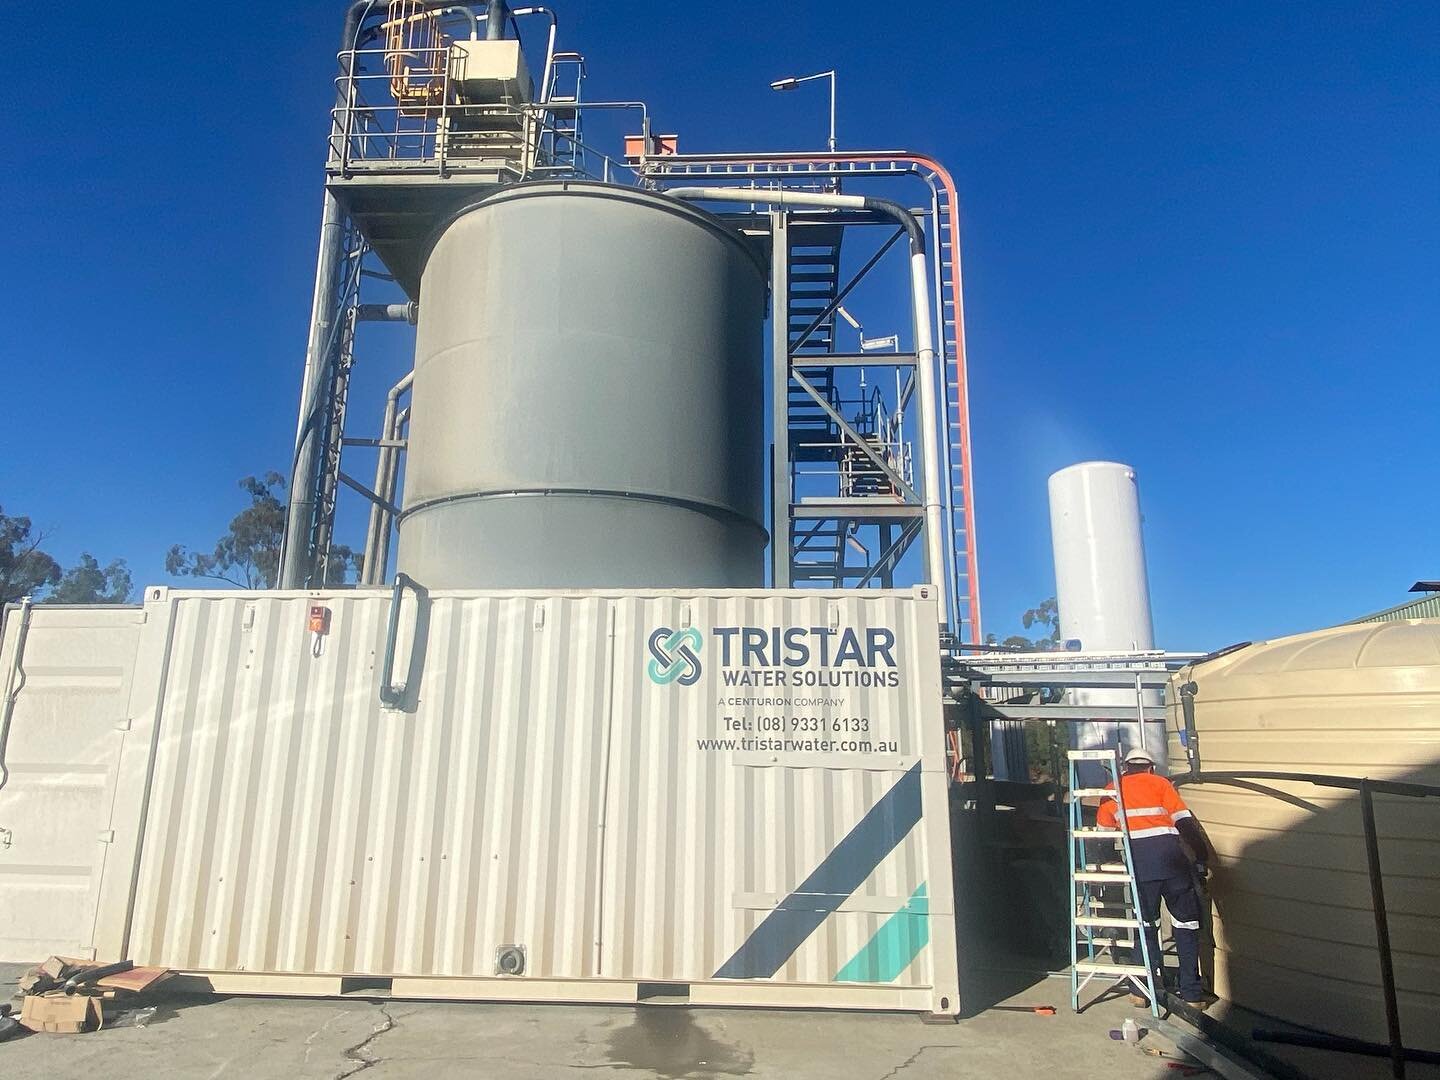 Installation of a new BWRO Water treatment plant at Mineral Hill Mine Site in Western NSW. 
MQE carried out the electrical and plumbing connections for this unit, as well as set up, testing and commissioning to supply a steady flow of clean water to 